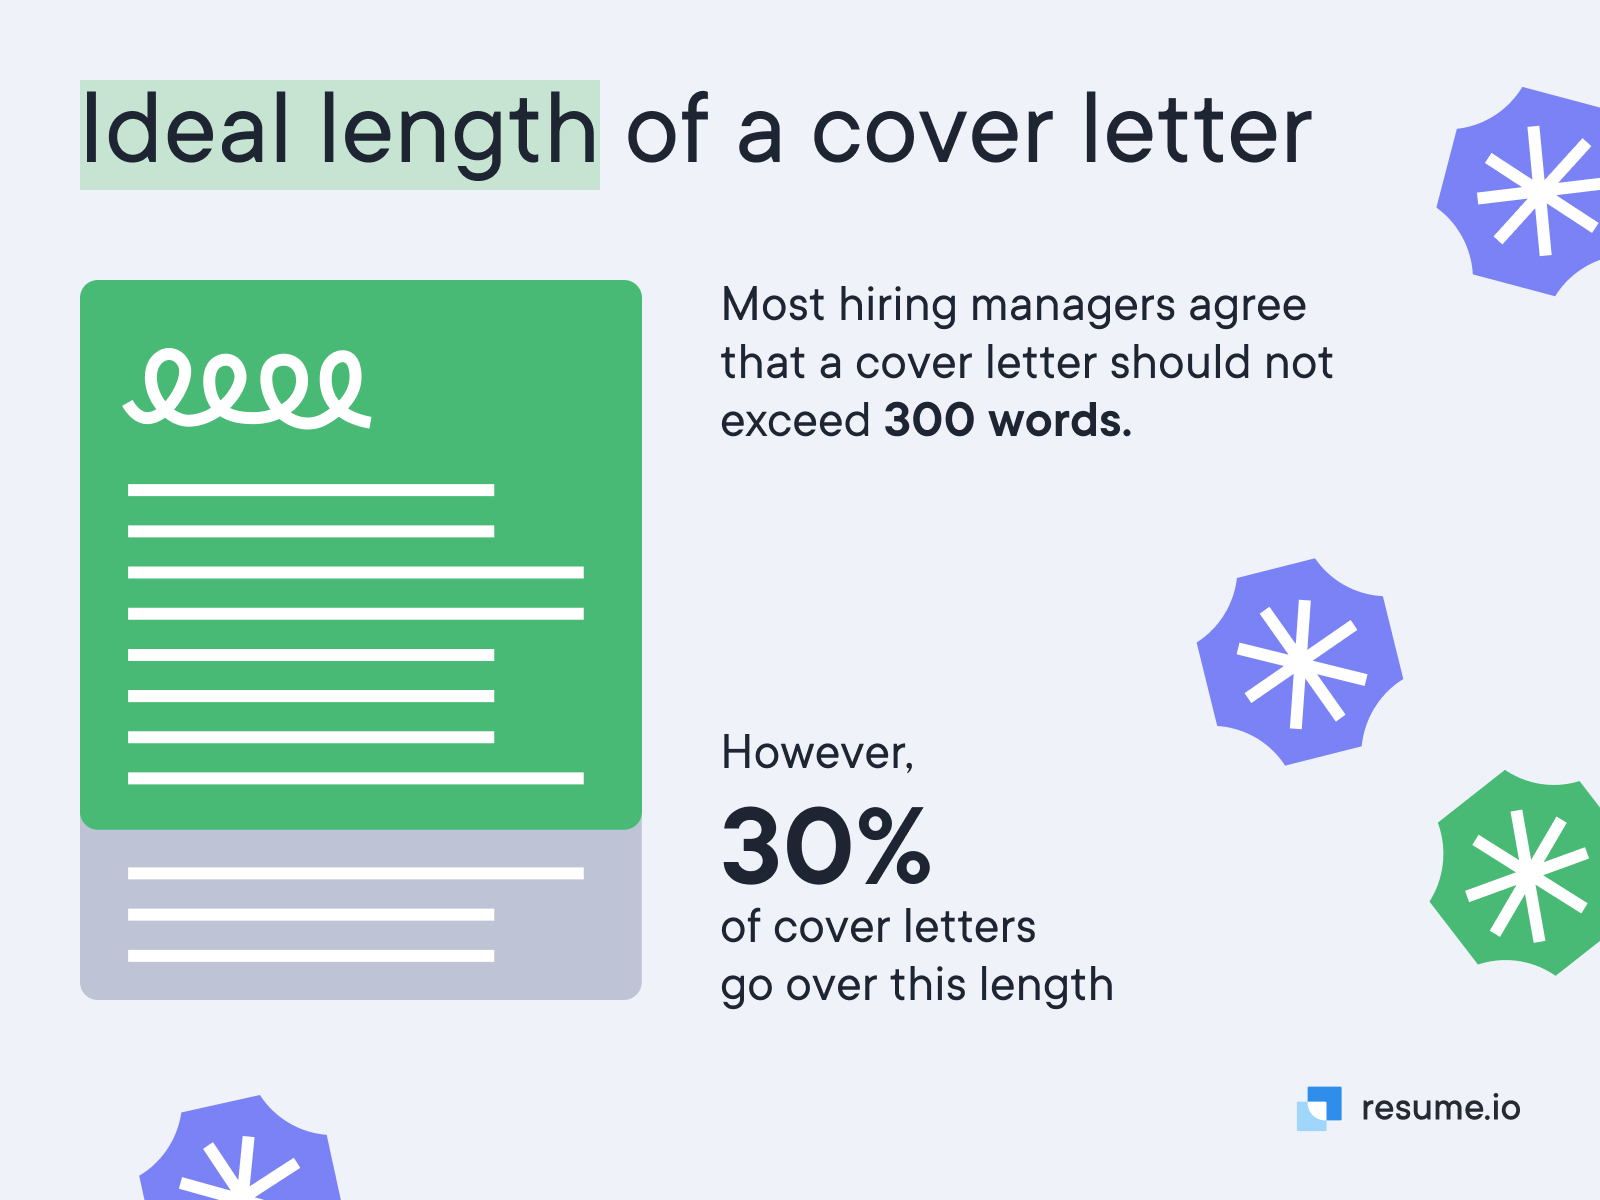 Ideal length of a cover letter